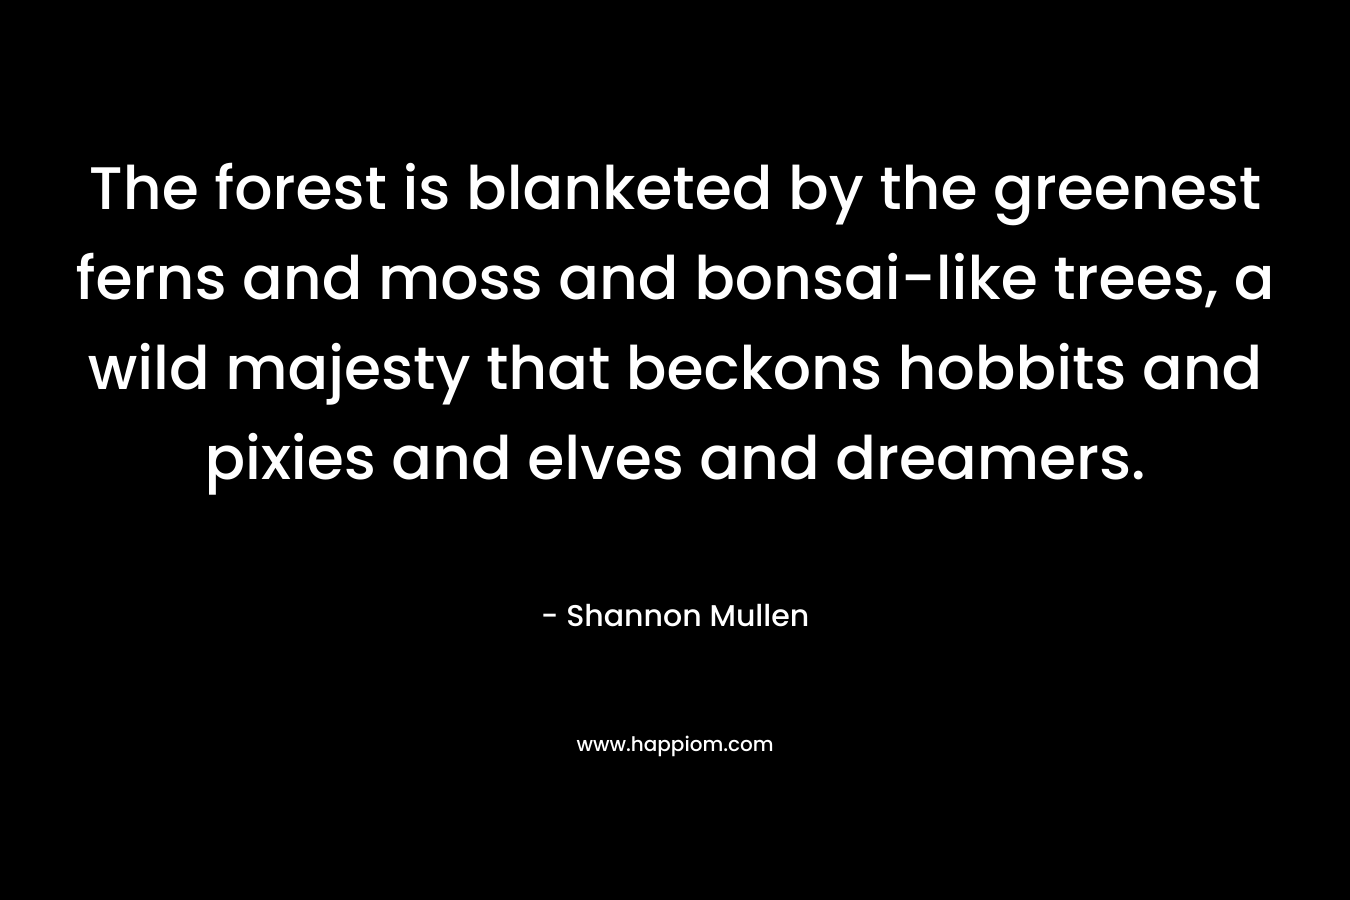 The forest is blanketed by the greenest ferns and moss and bonsai-like trees, a wild majesty that beckons hobbits and pixies and elves and dreamers.